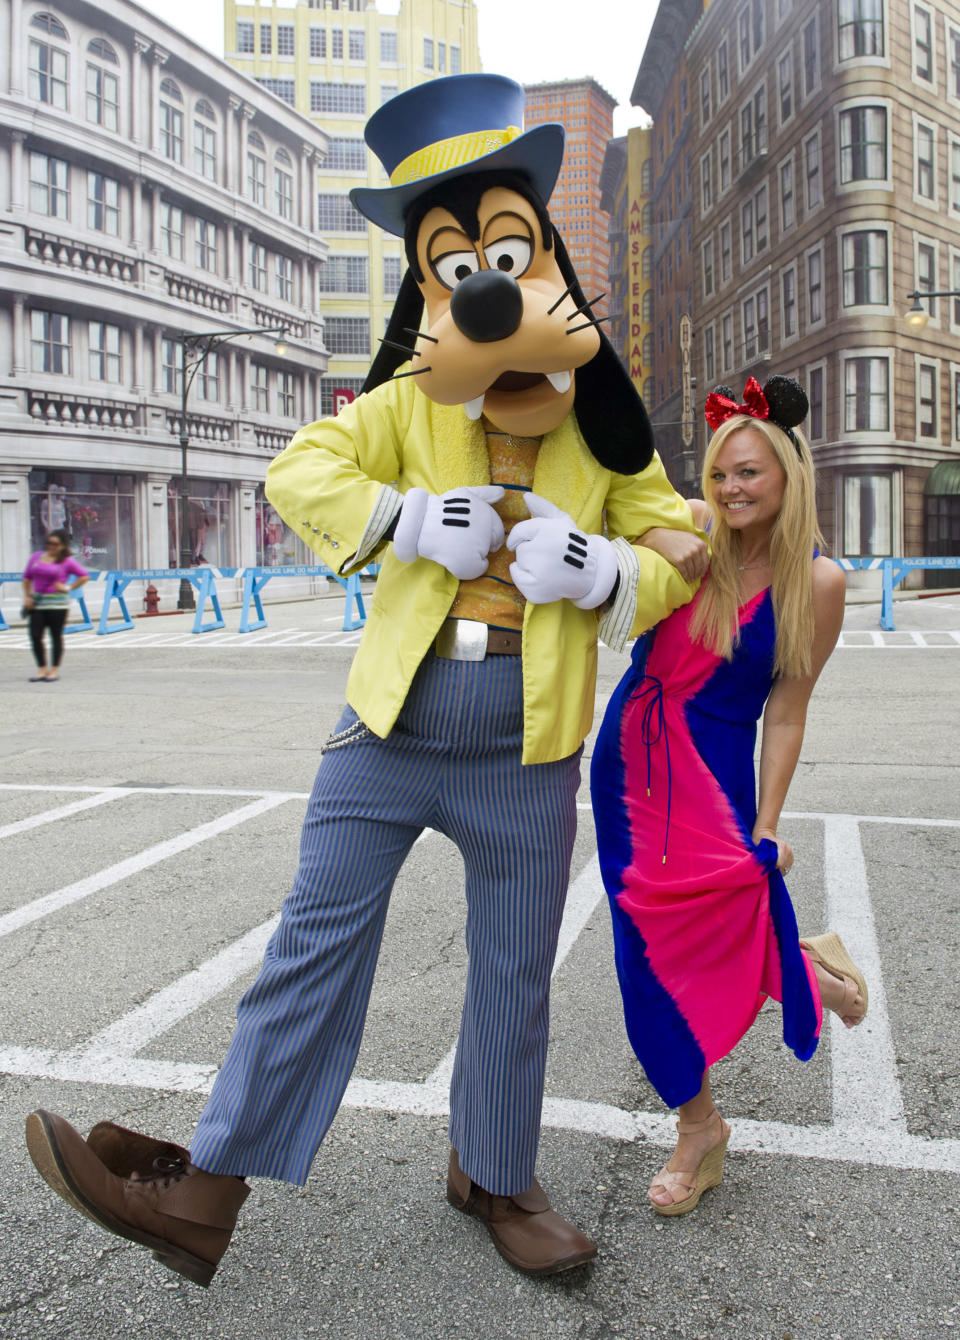 Singer and U.K. radio presenter Emma Bunton, known as 'Baby Spice' as a member of the all-girl pop group The Spice Girls, poses with Goofy at Disney's Hollywood Studios theme park September 25, 2012 in Lake Buena Vista, Florida.   (Photo by Gene Duncan/Disney Parks via Getty Images)